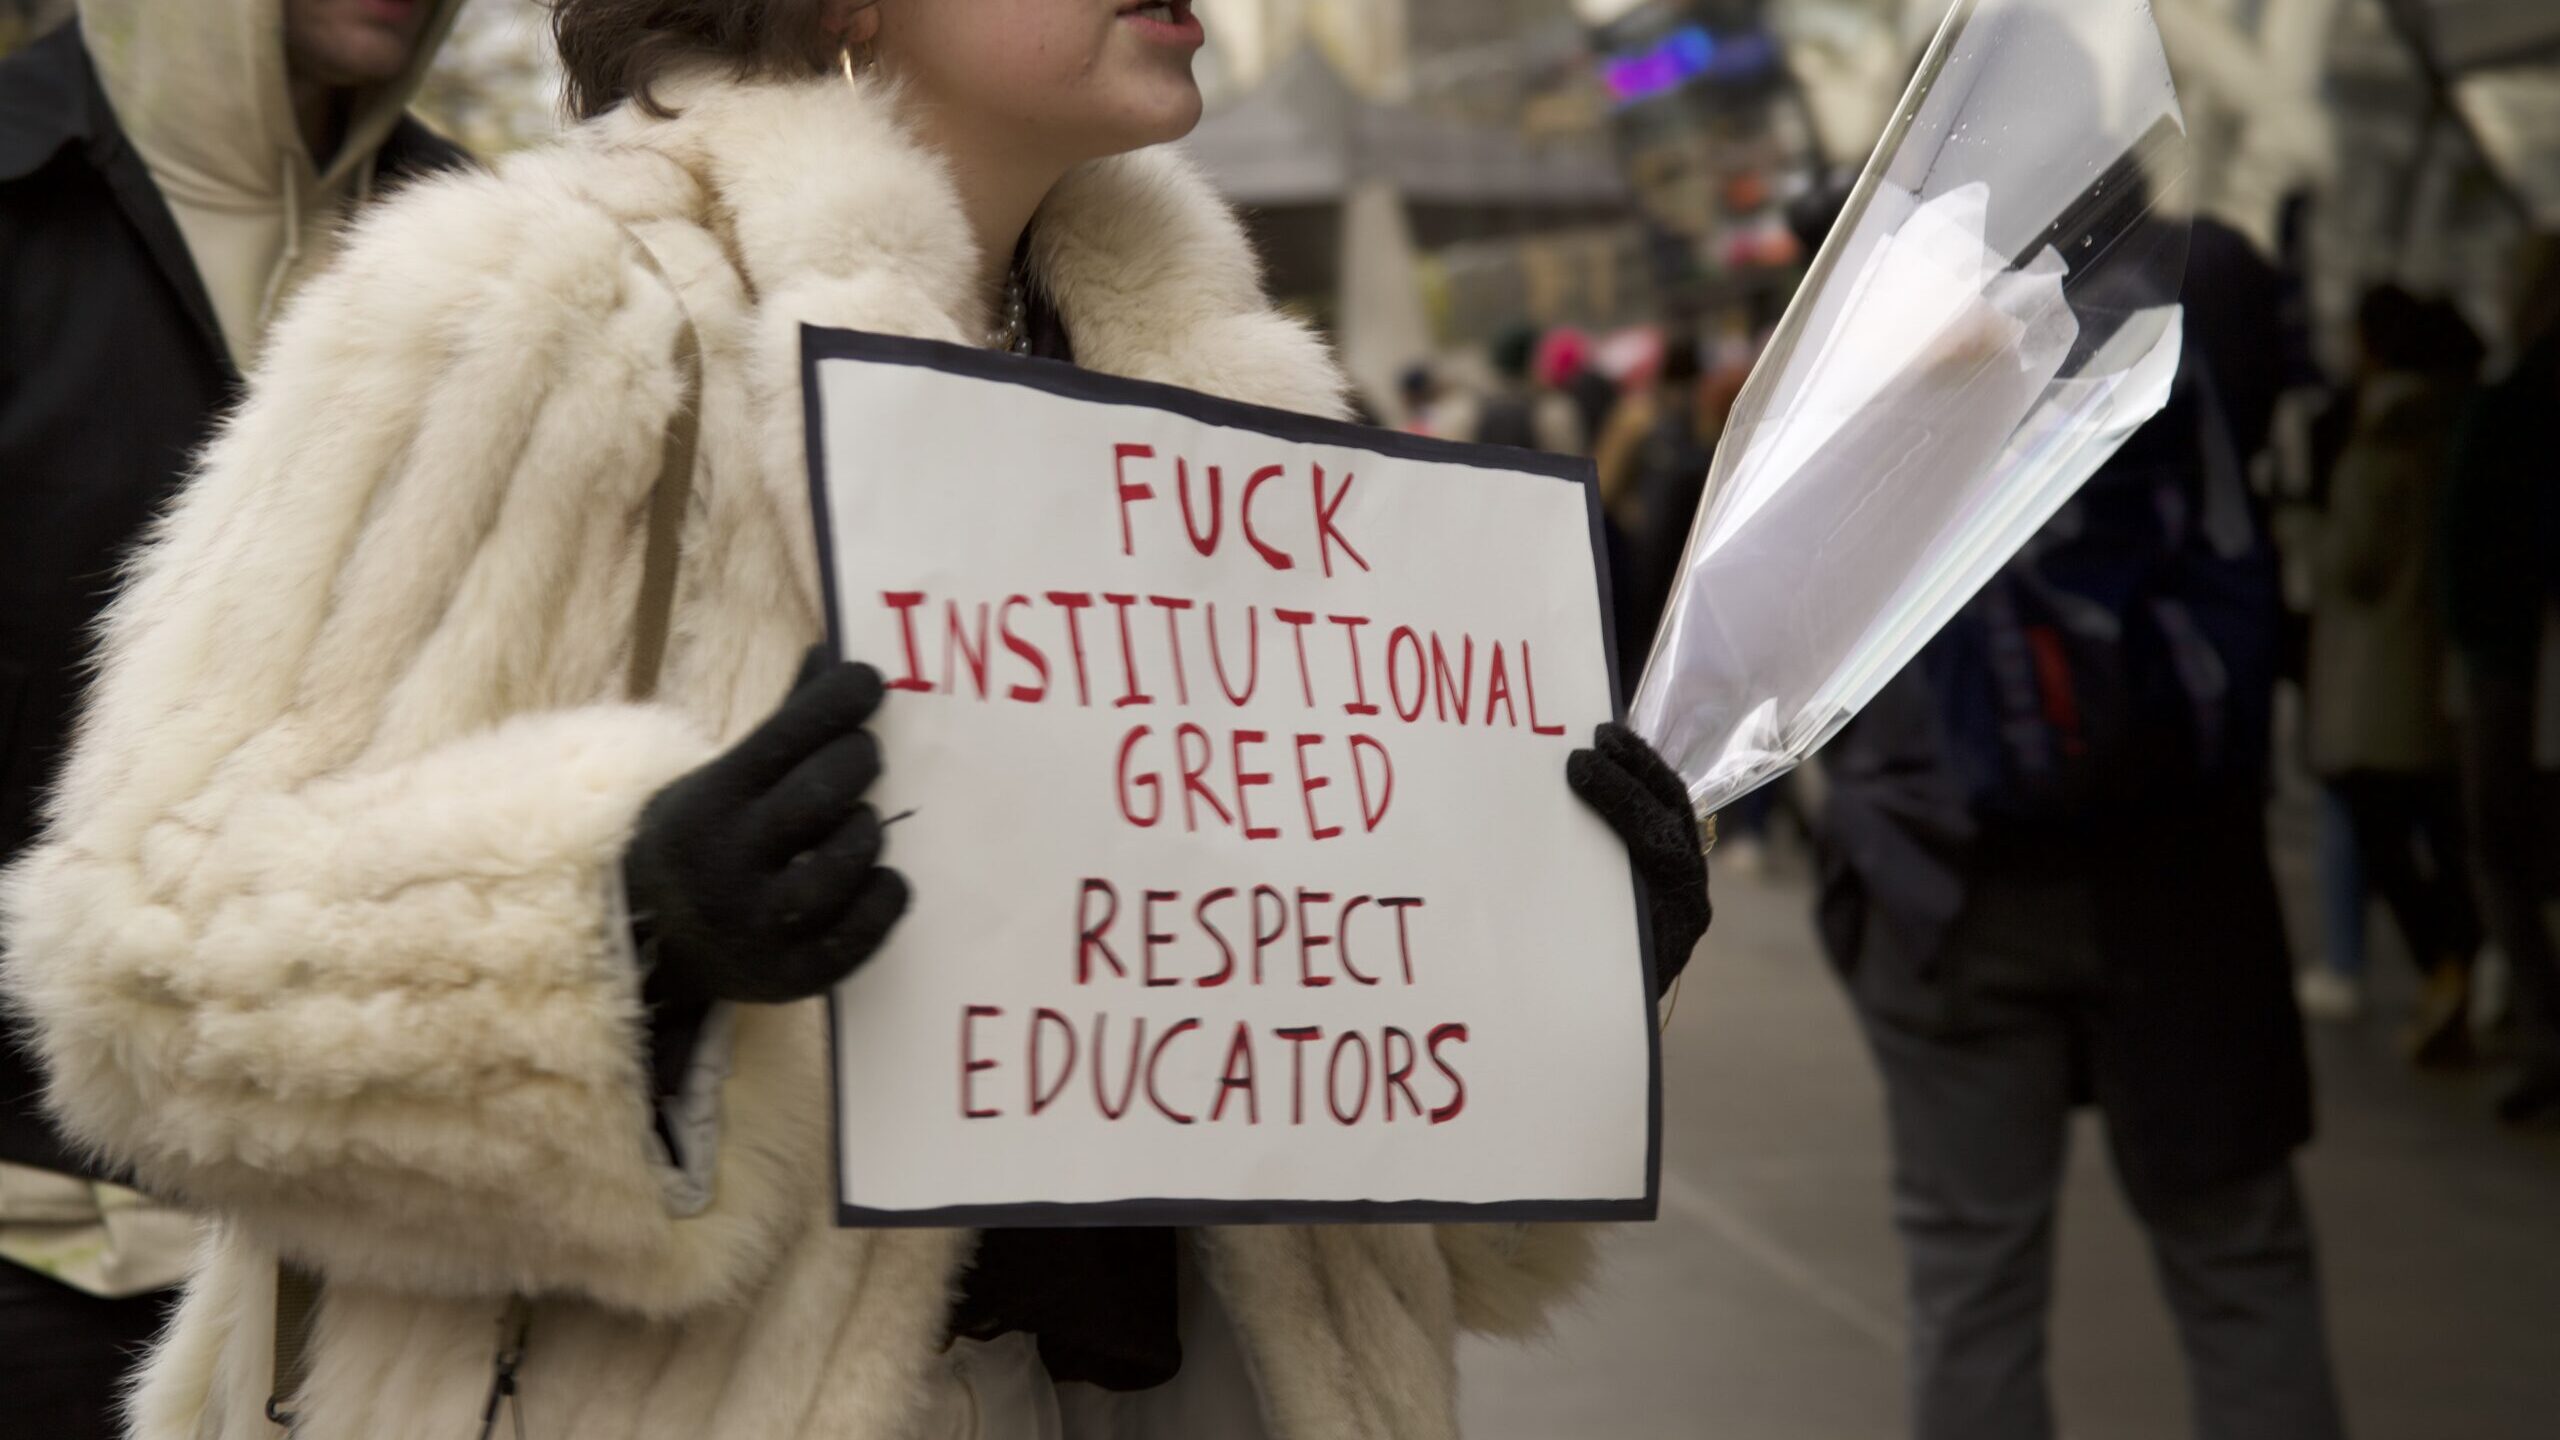 Student at part time faculty strike holding a sign stating "fuck institutional greed, respect educators"